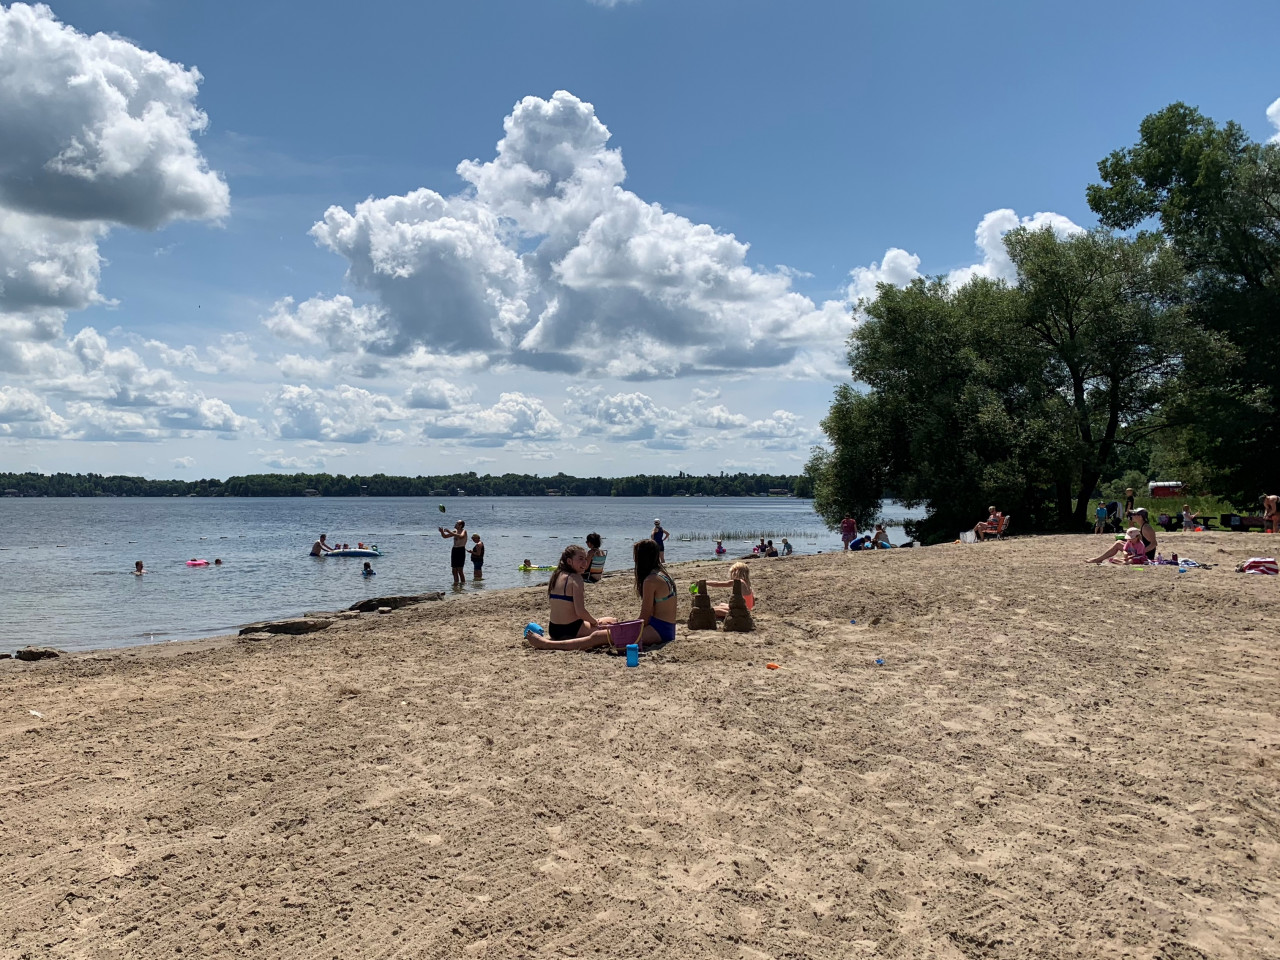 People play in the sand in front of the blue waters of Lower Rideau Lake. White puffy clouds dot the blue sky.